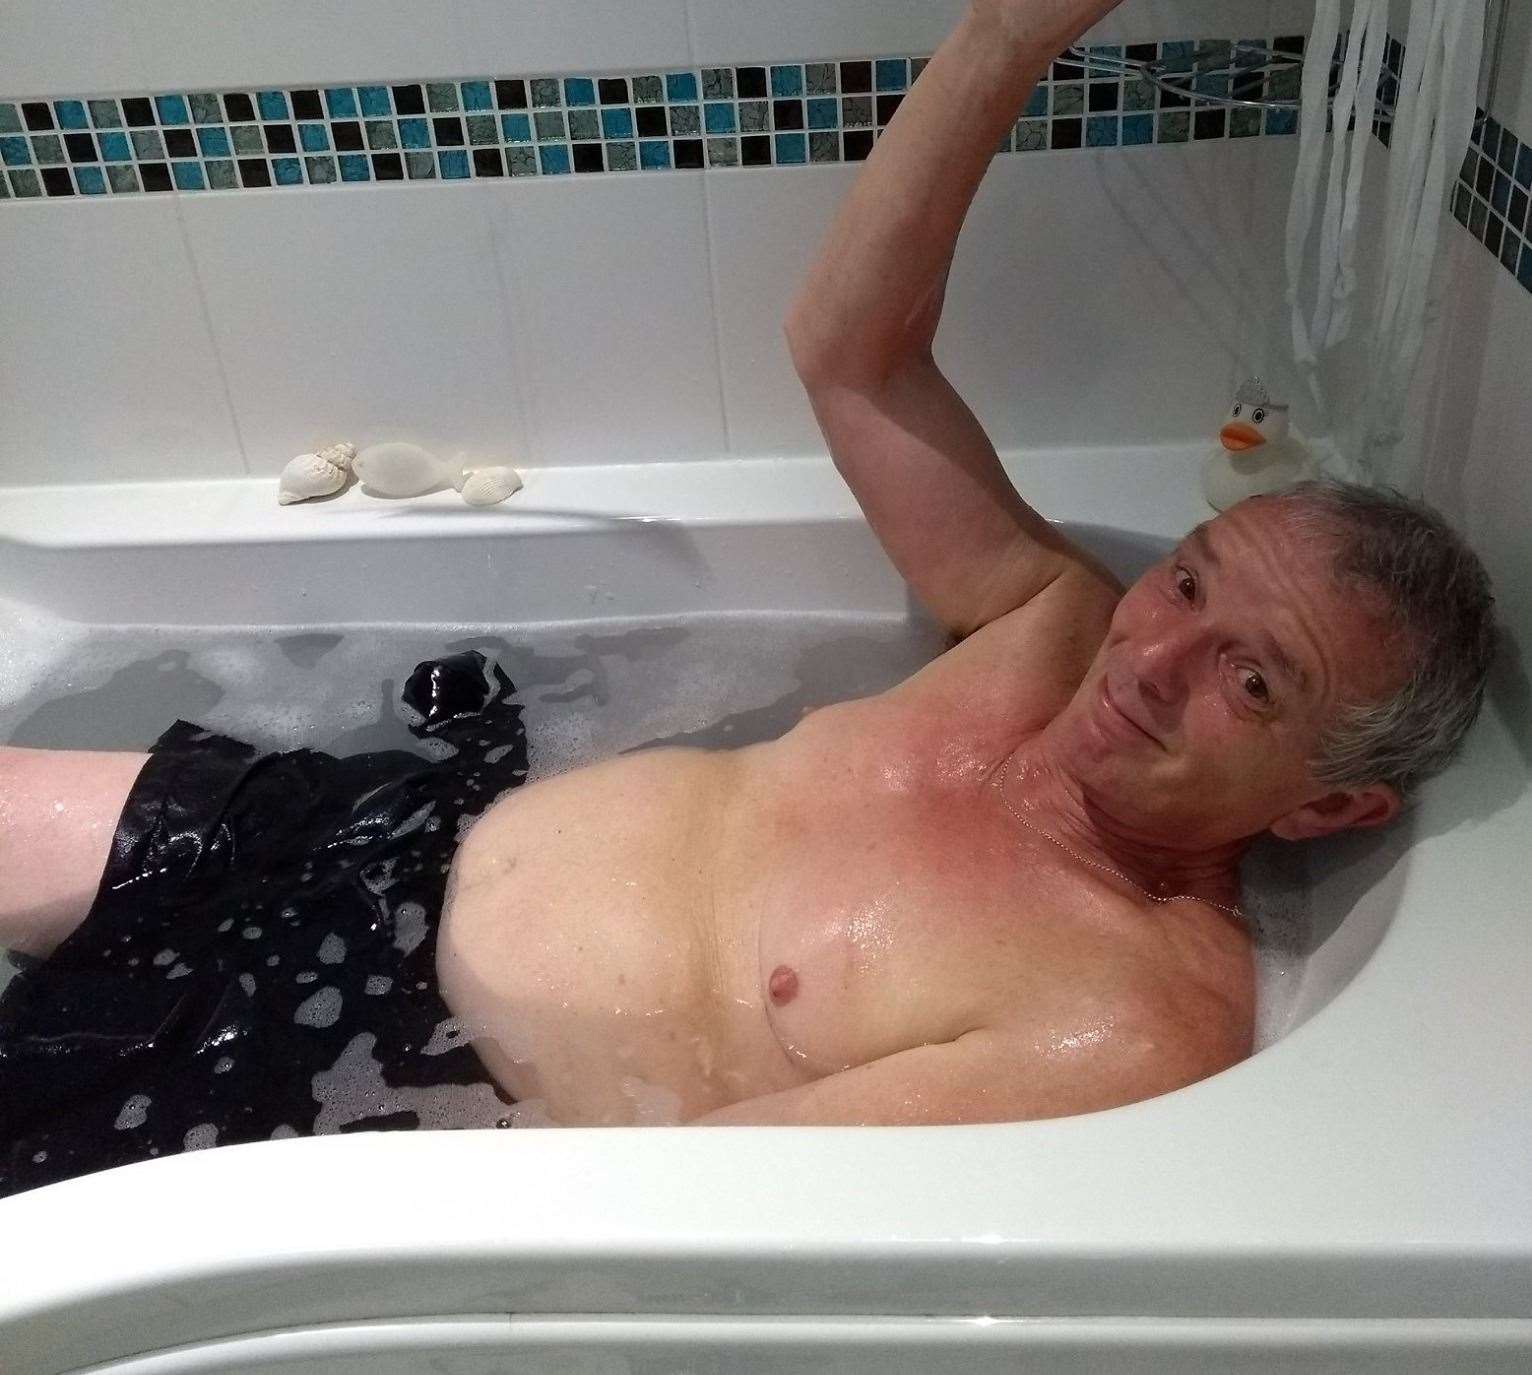 Martin Hunt 'swam the Channel' in his bath to raise money for Hospice UK